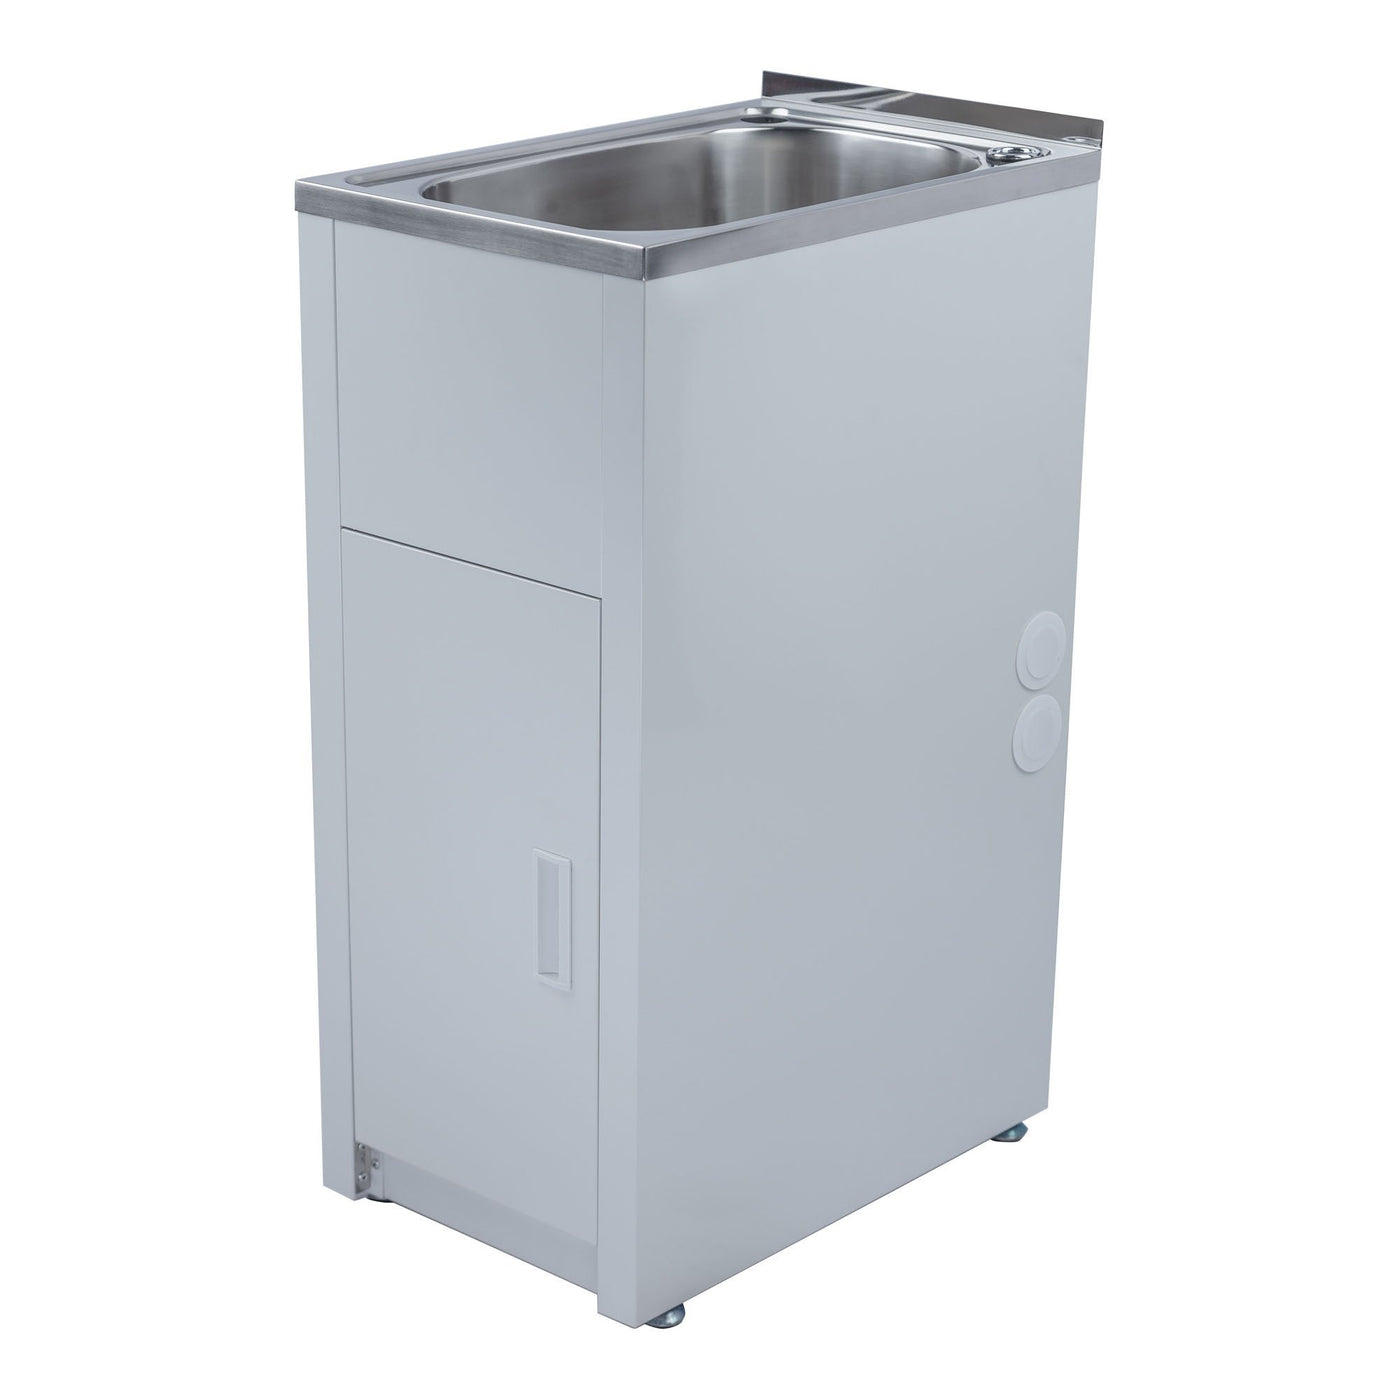 Ground 30 Liter Compact Laundry Tub & Cabinet